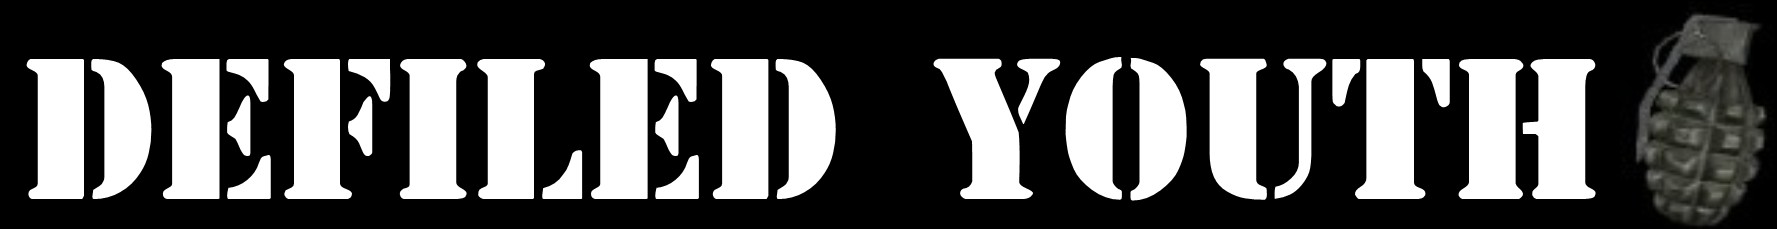 Defiled Youth's logo